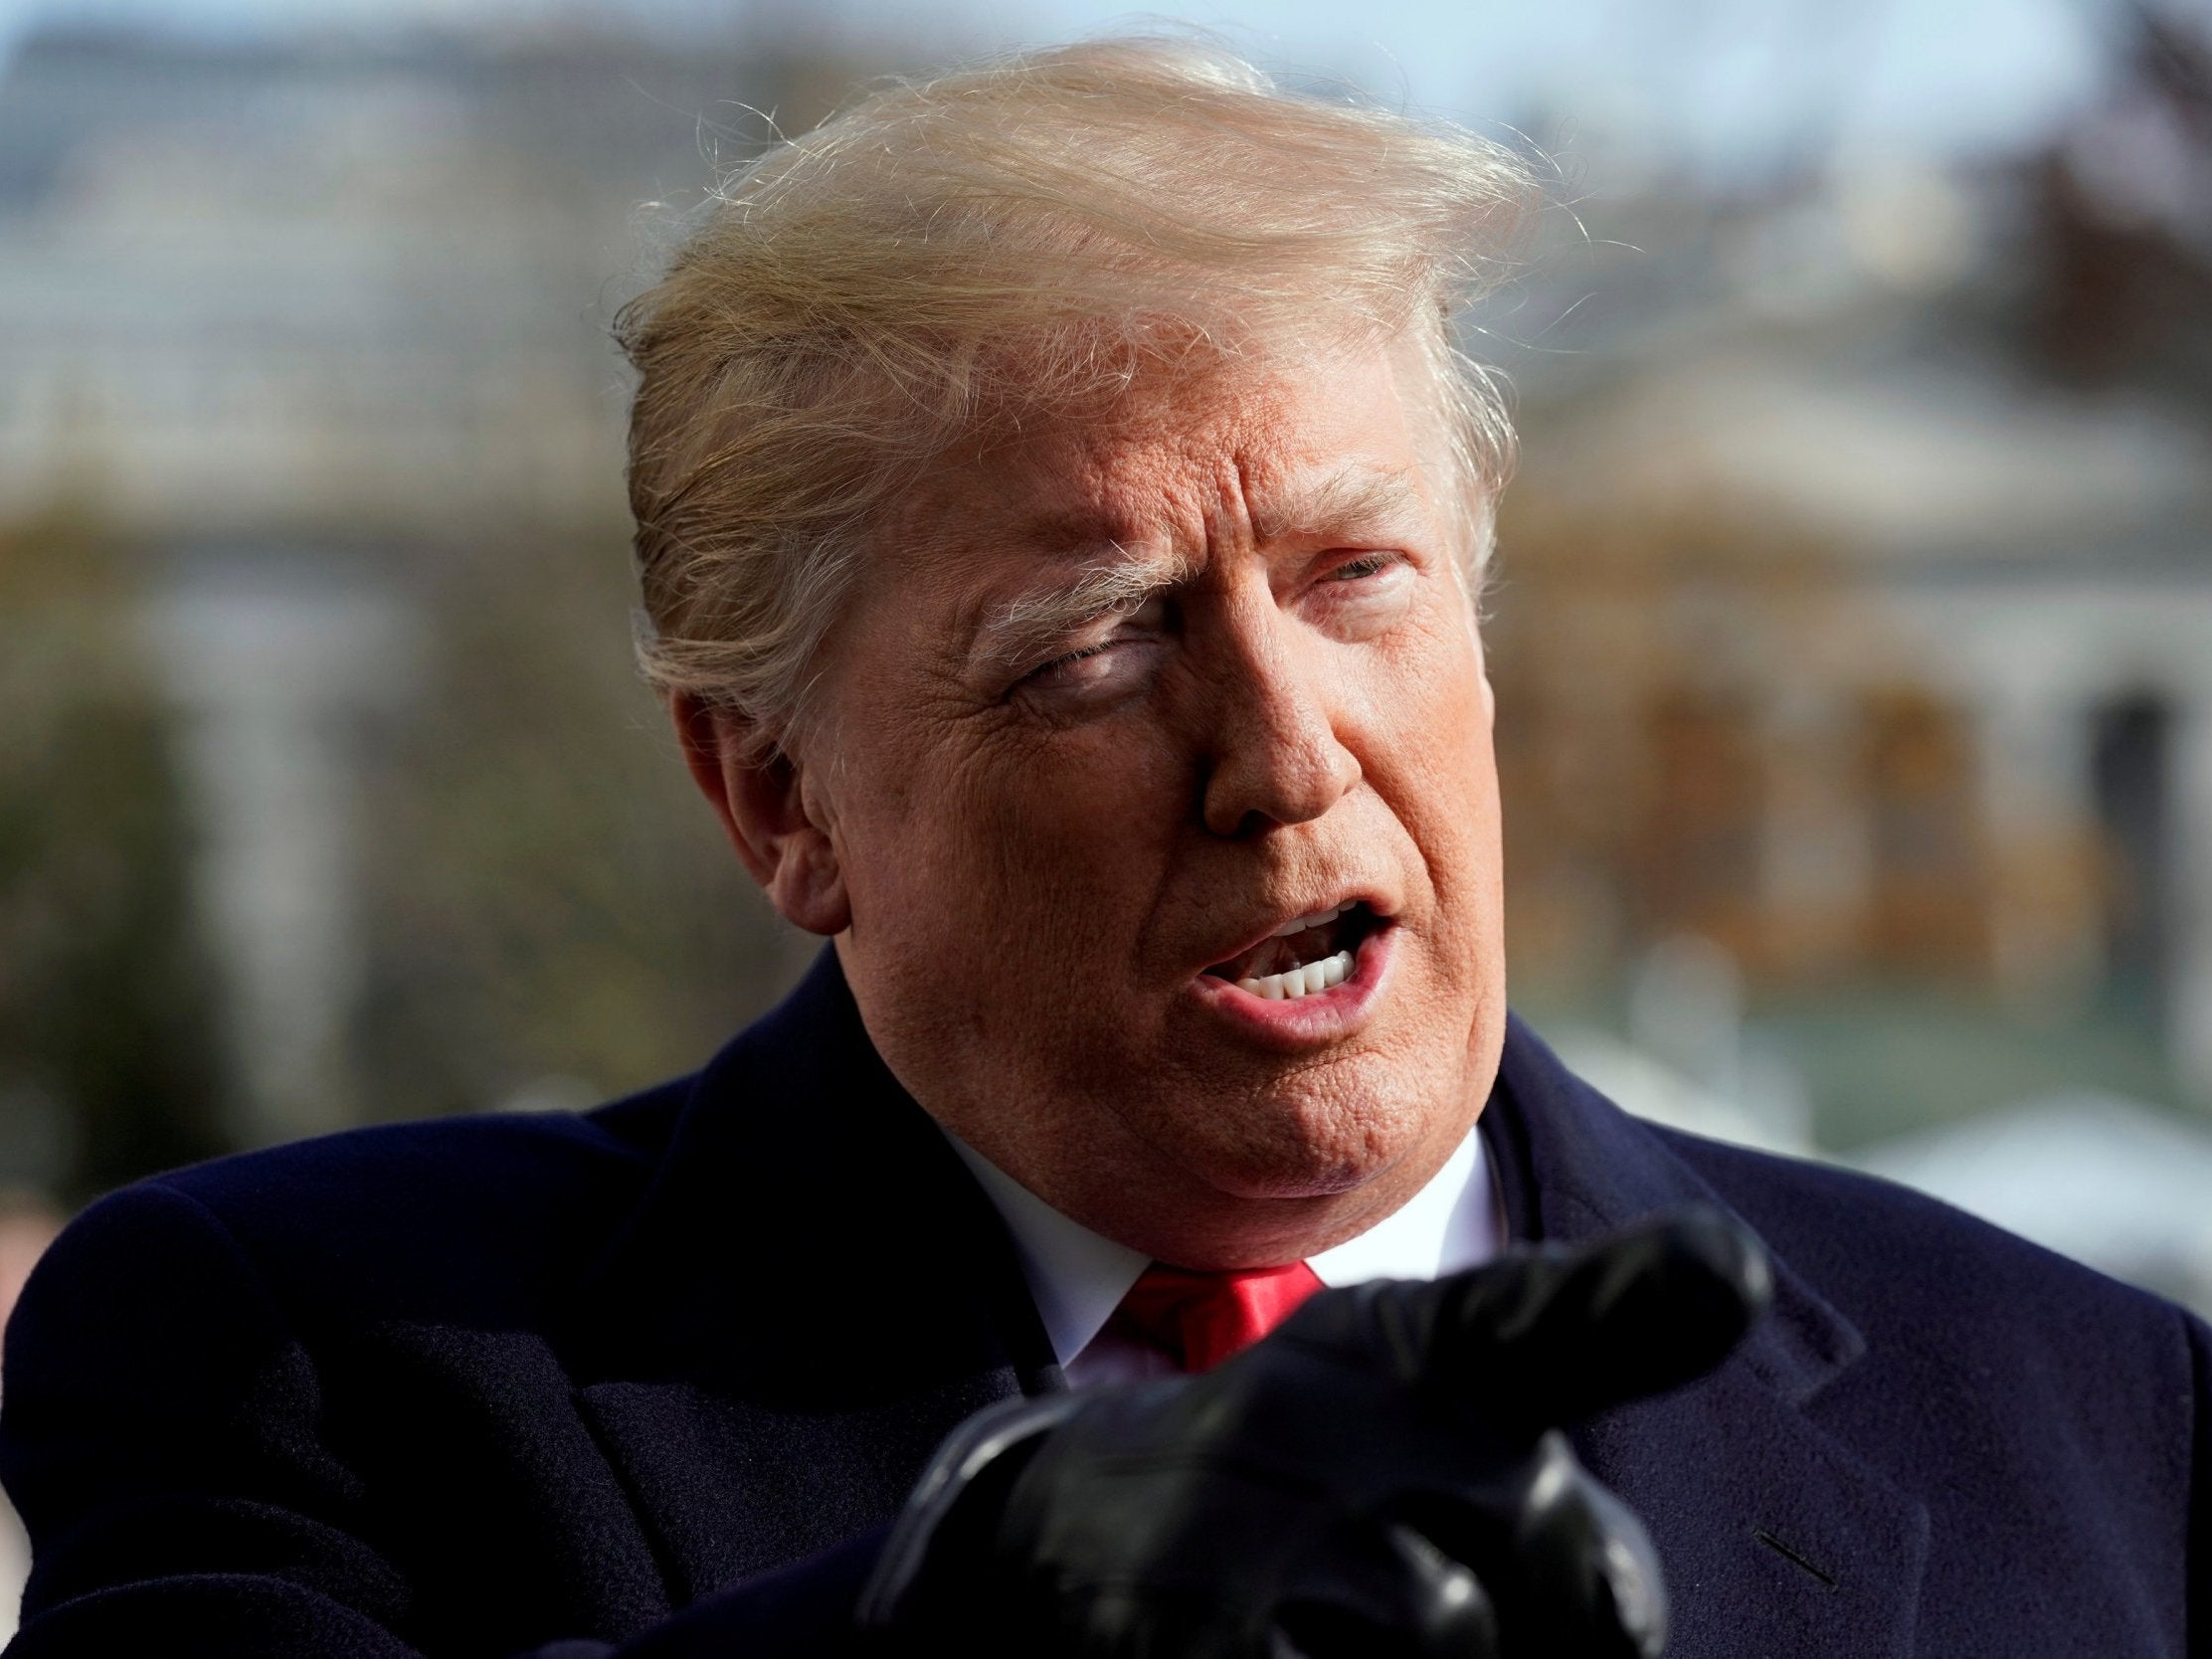 Trump-Mueller investigation - LIVE: President lashes out over chief of staff, border wall and Democrats as former lawyer Cohen&apos;s sentencing approaches